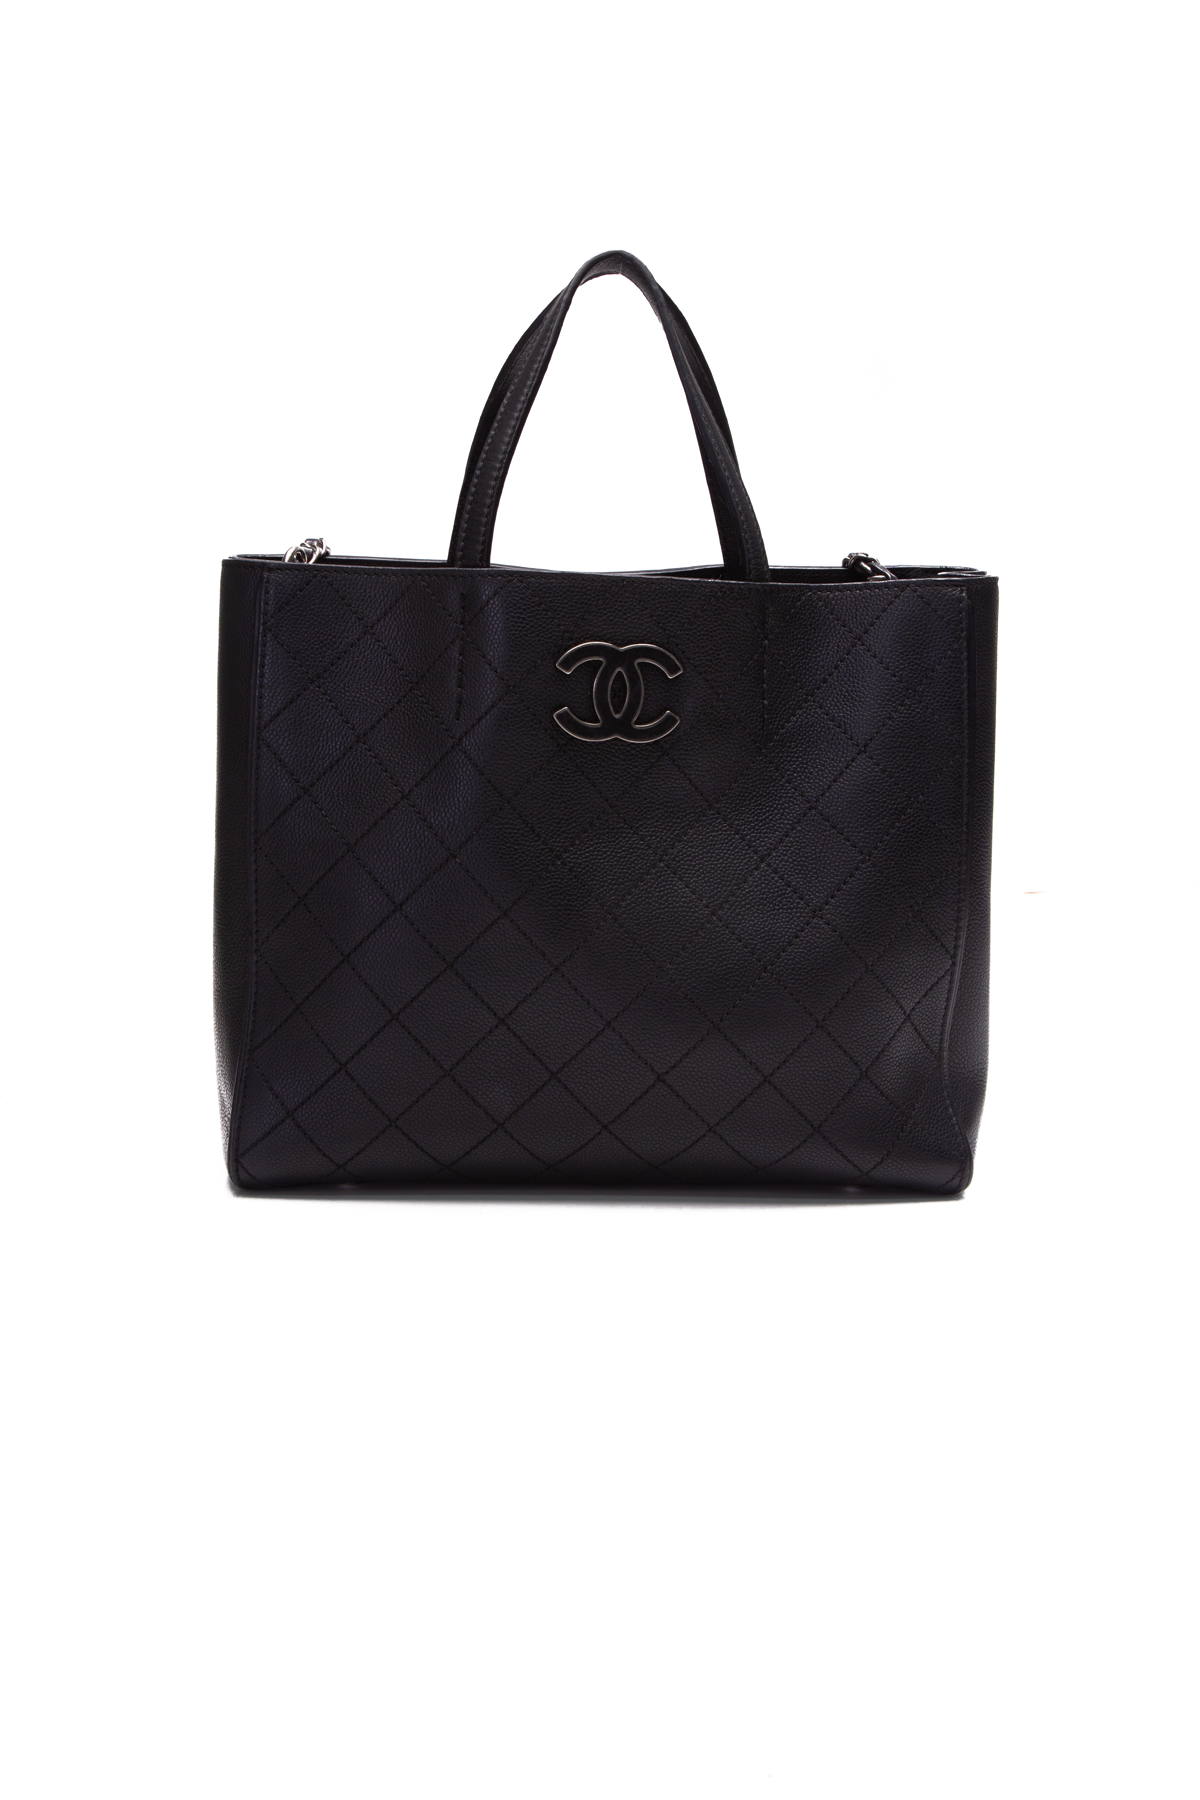 Chanel Stitched Hamptons Tote Bag - Couture USA